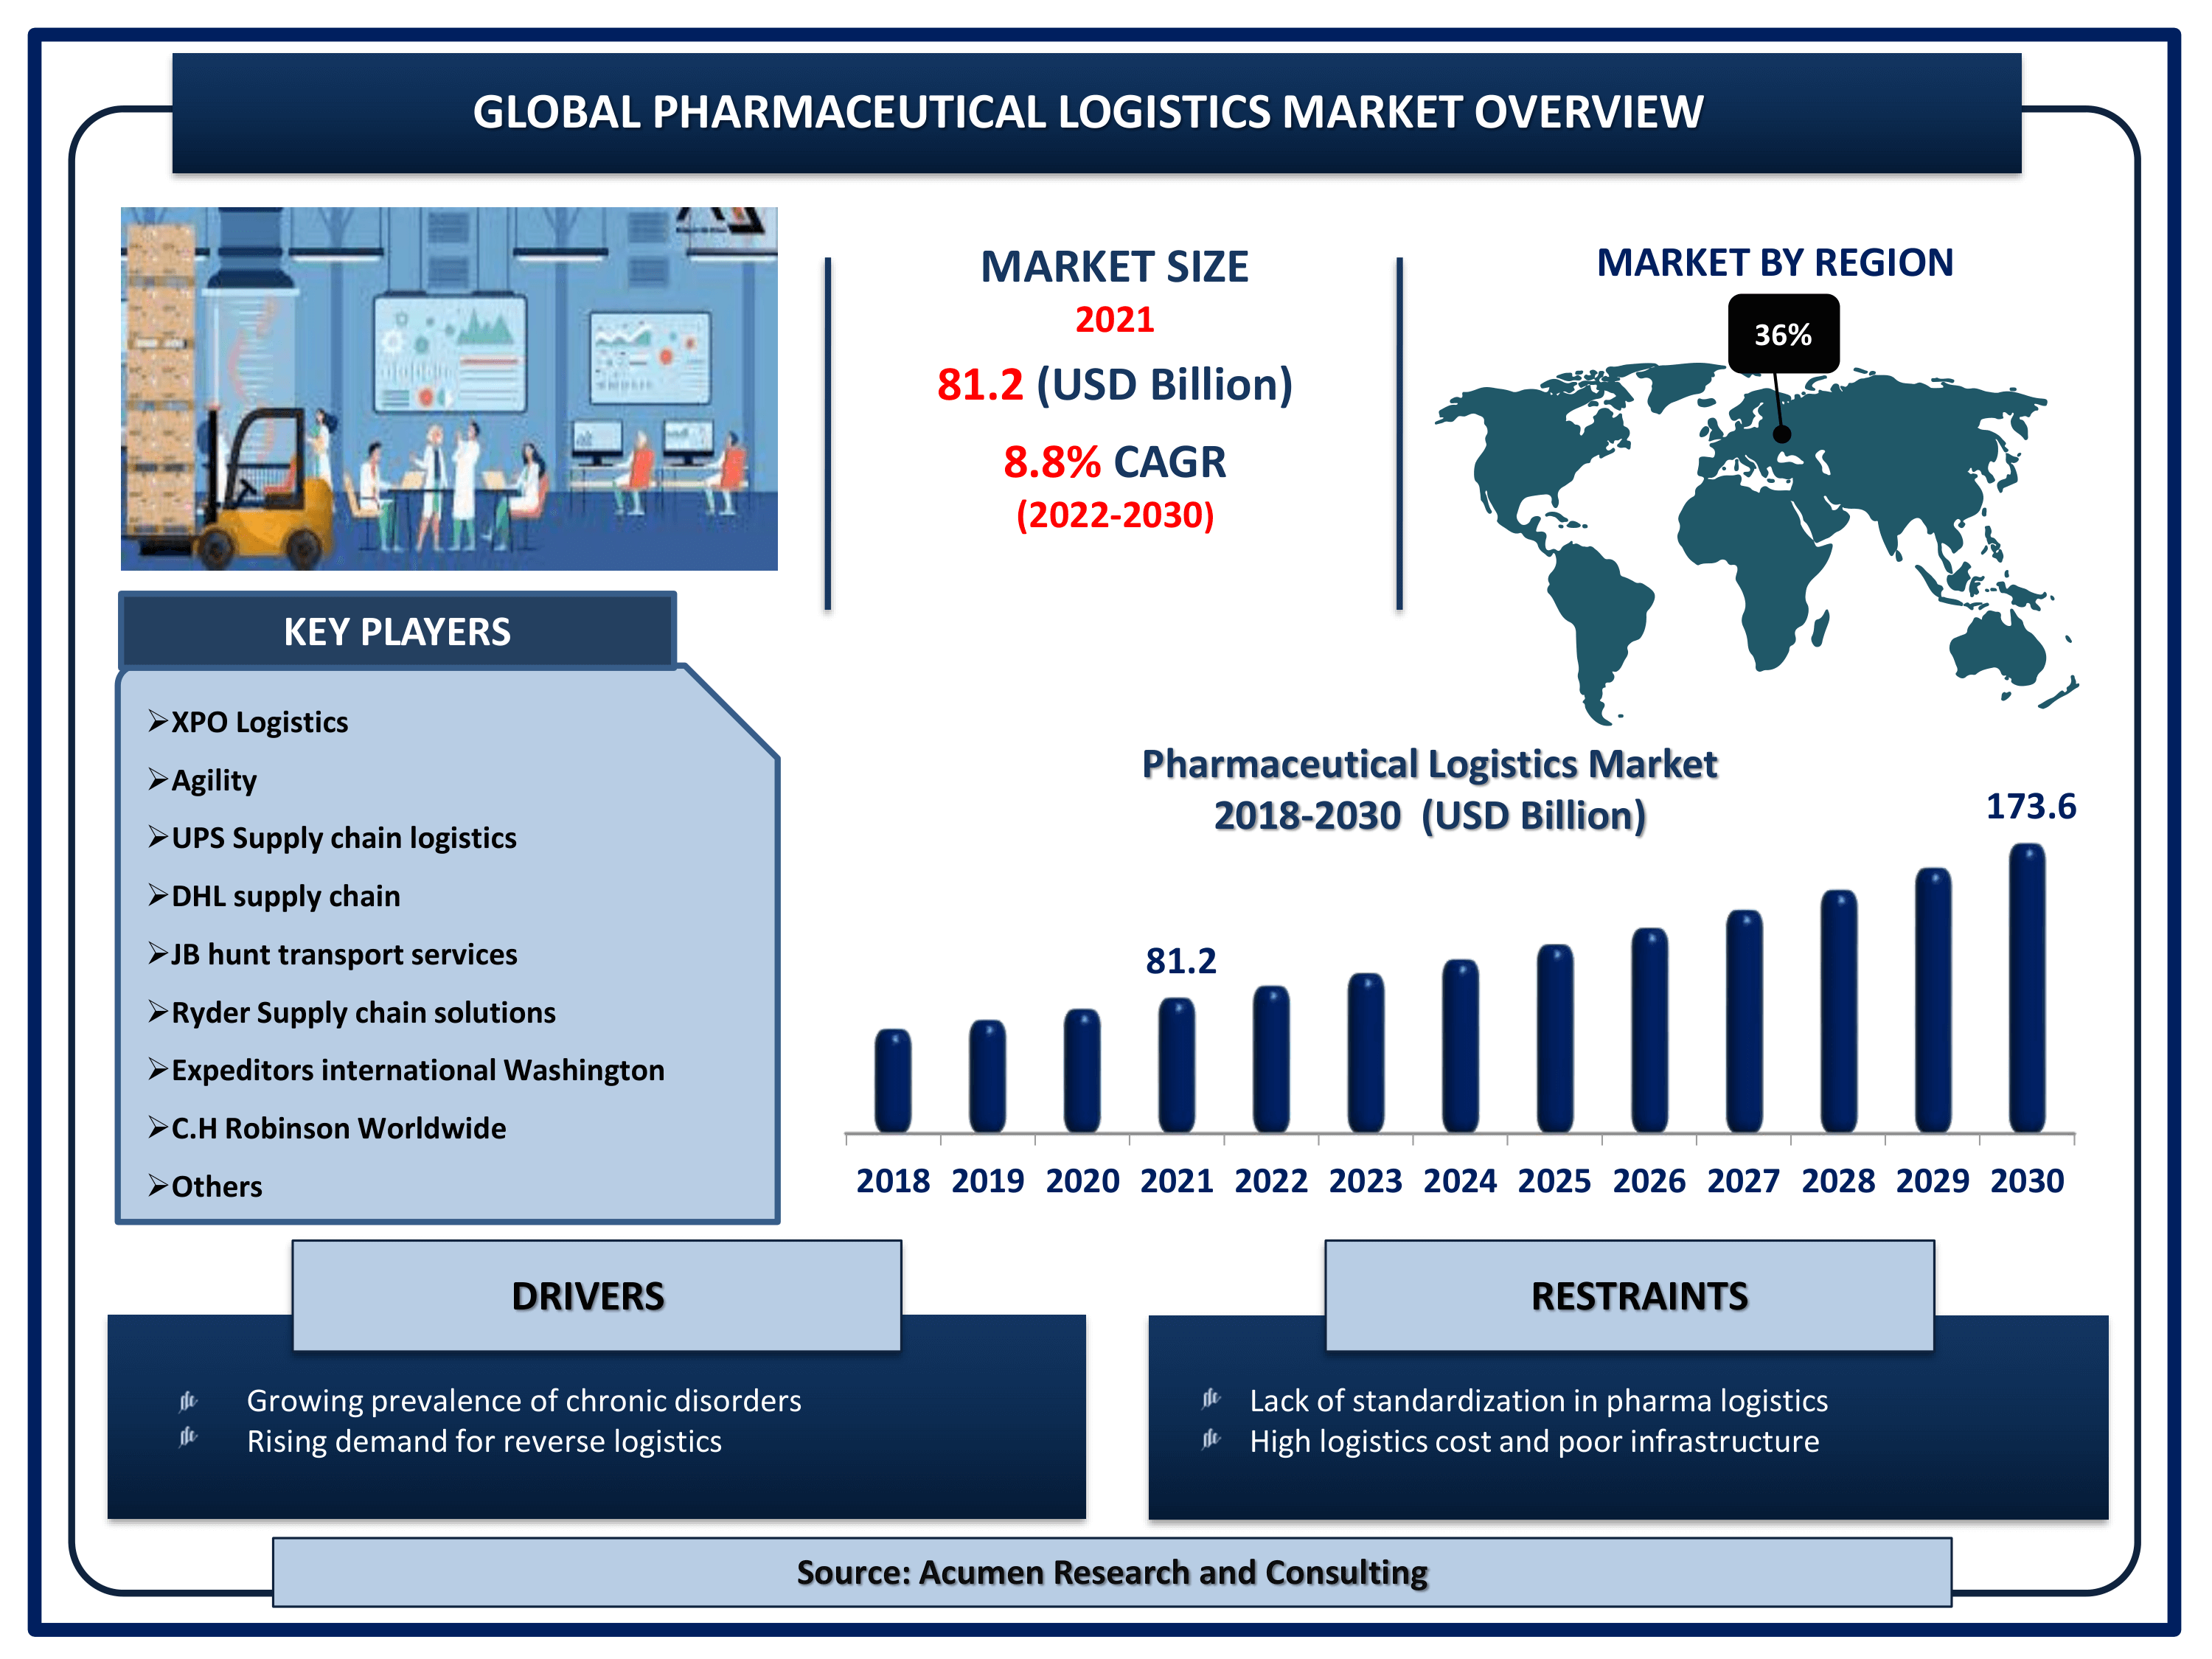 Global pharmaceutical logistics market revenue is estimated to reach USD 173.6 Billion by 2030 with a CAGR of 8.8% from 2022 to 2030